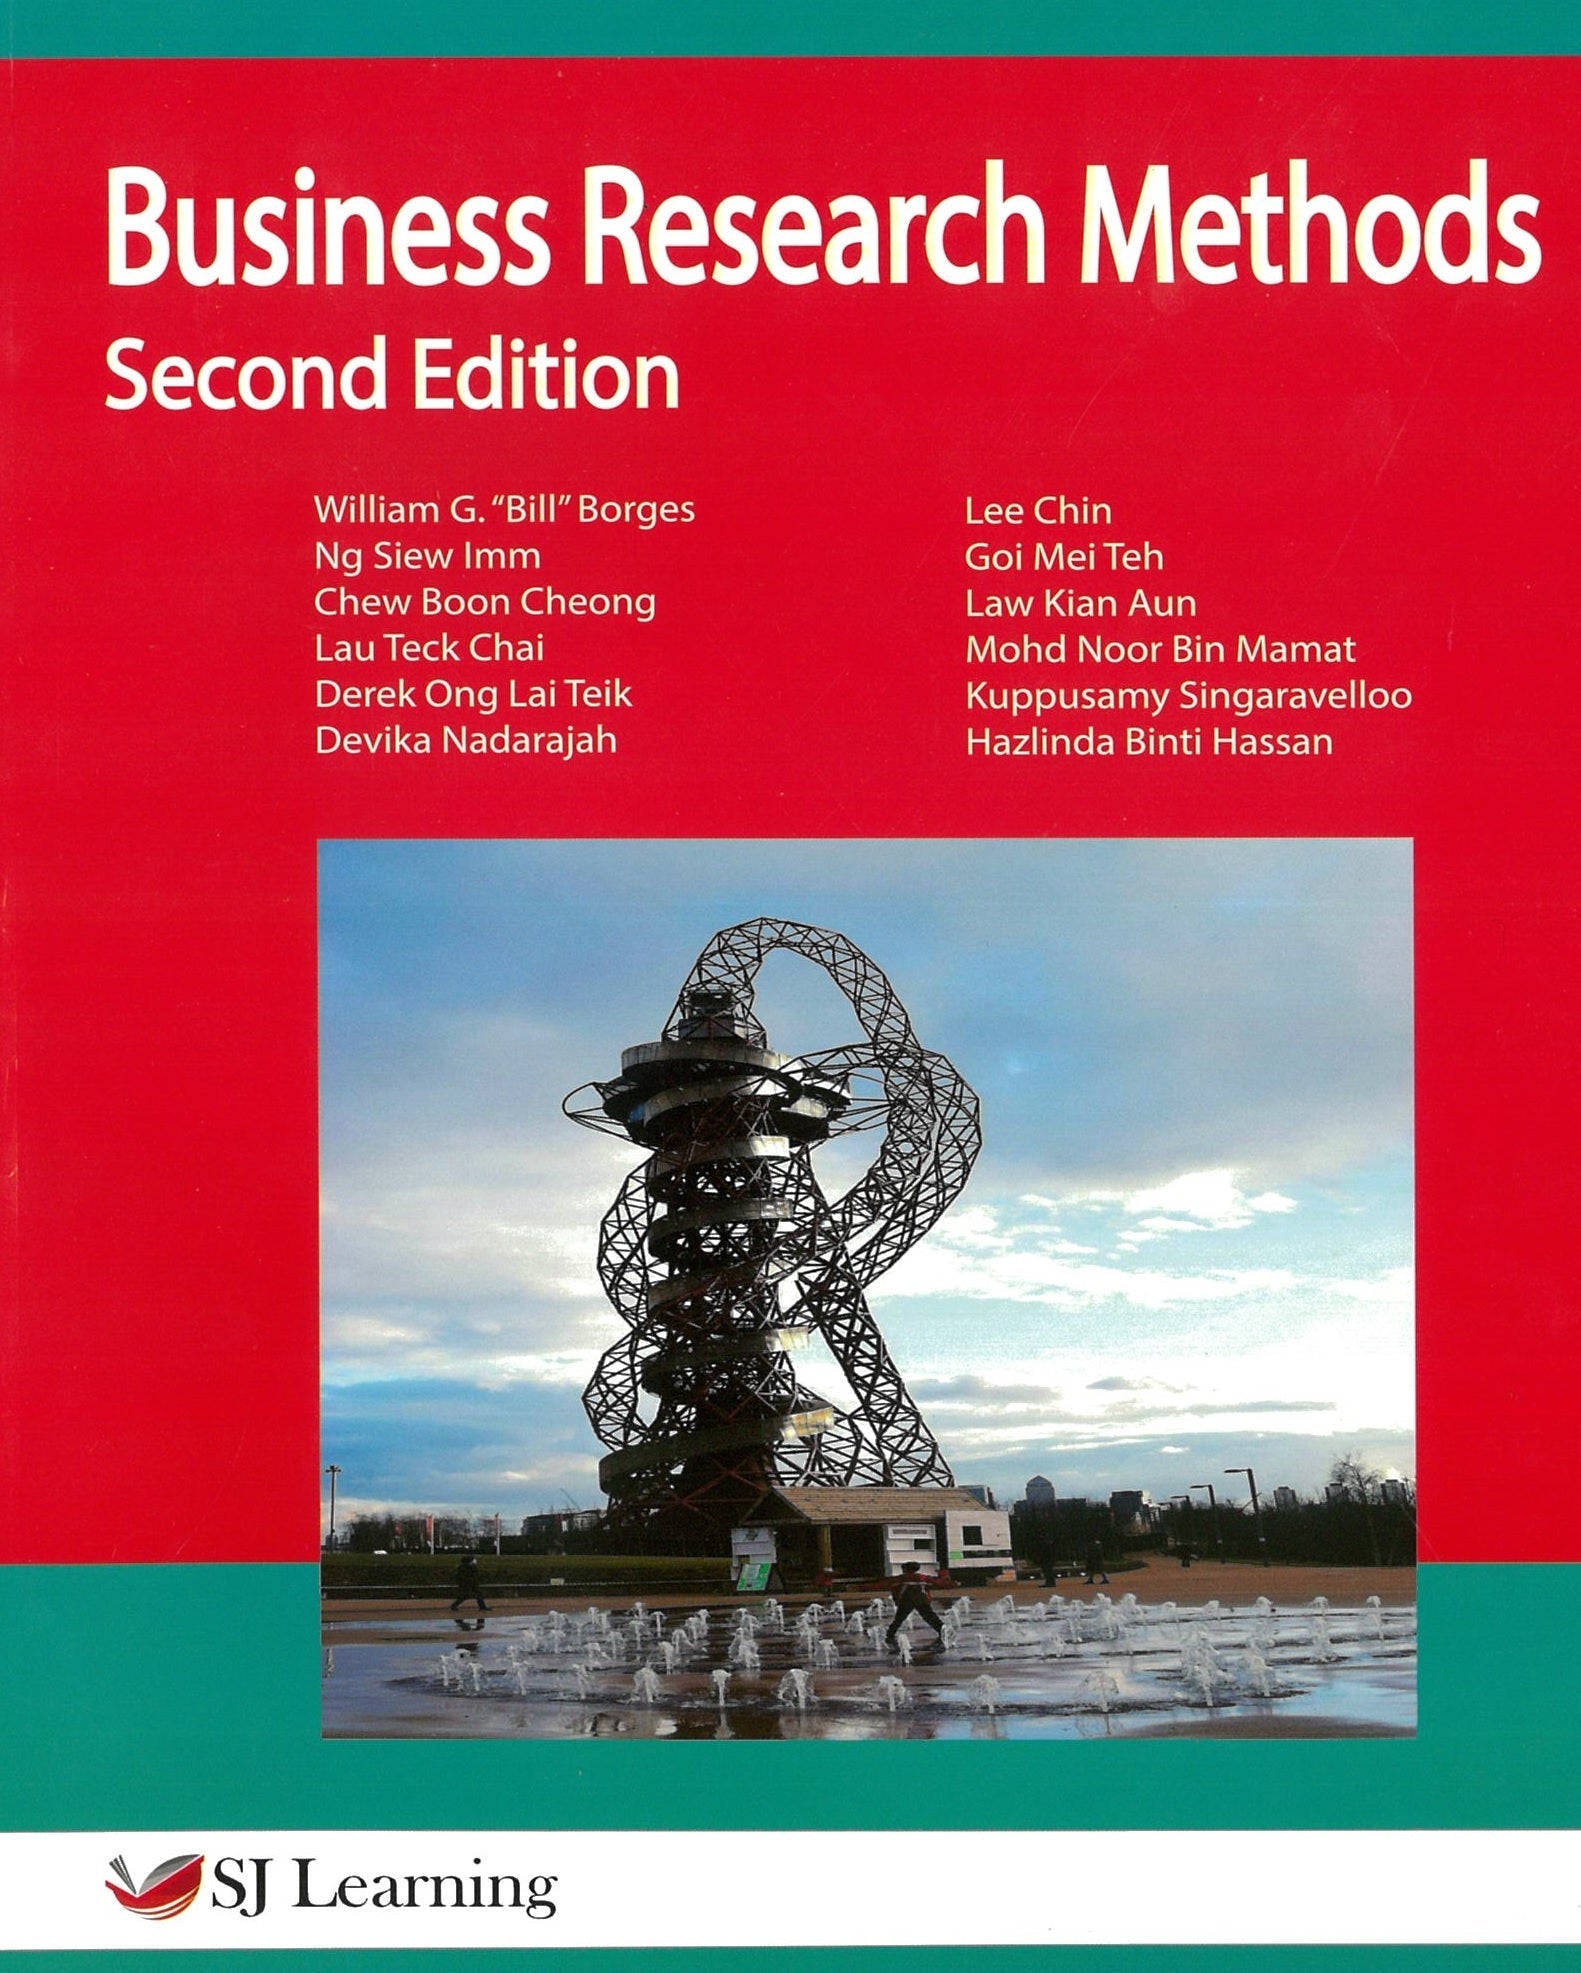 Business Research Methods - Borges - 9789671599747 - SJ Learning